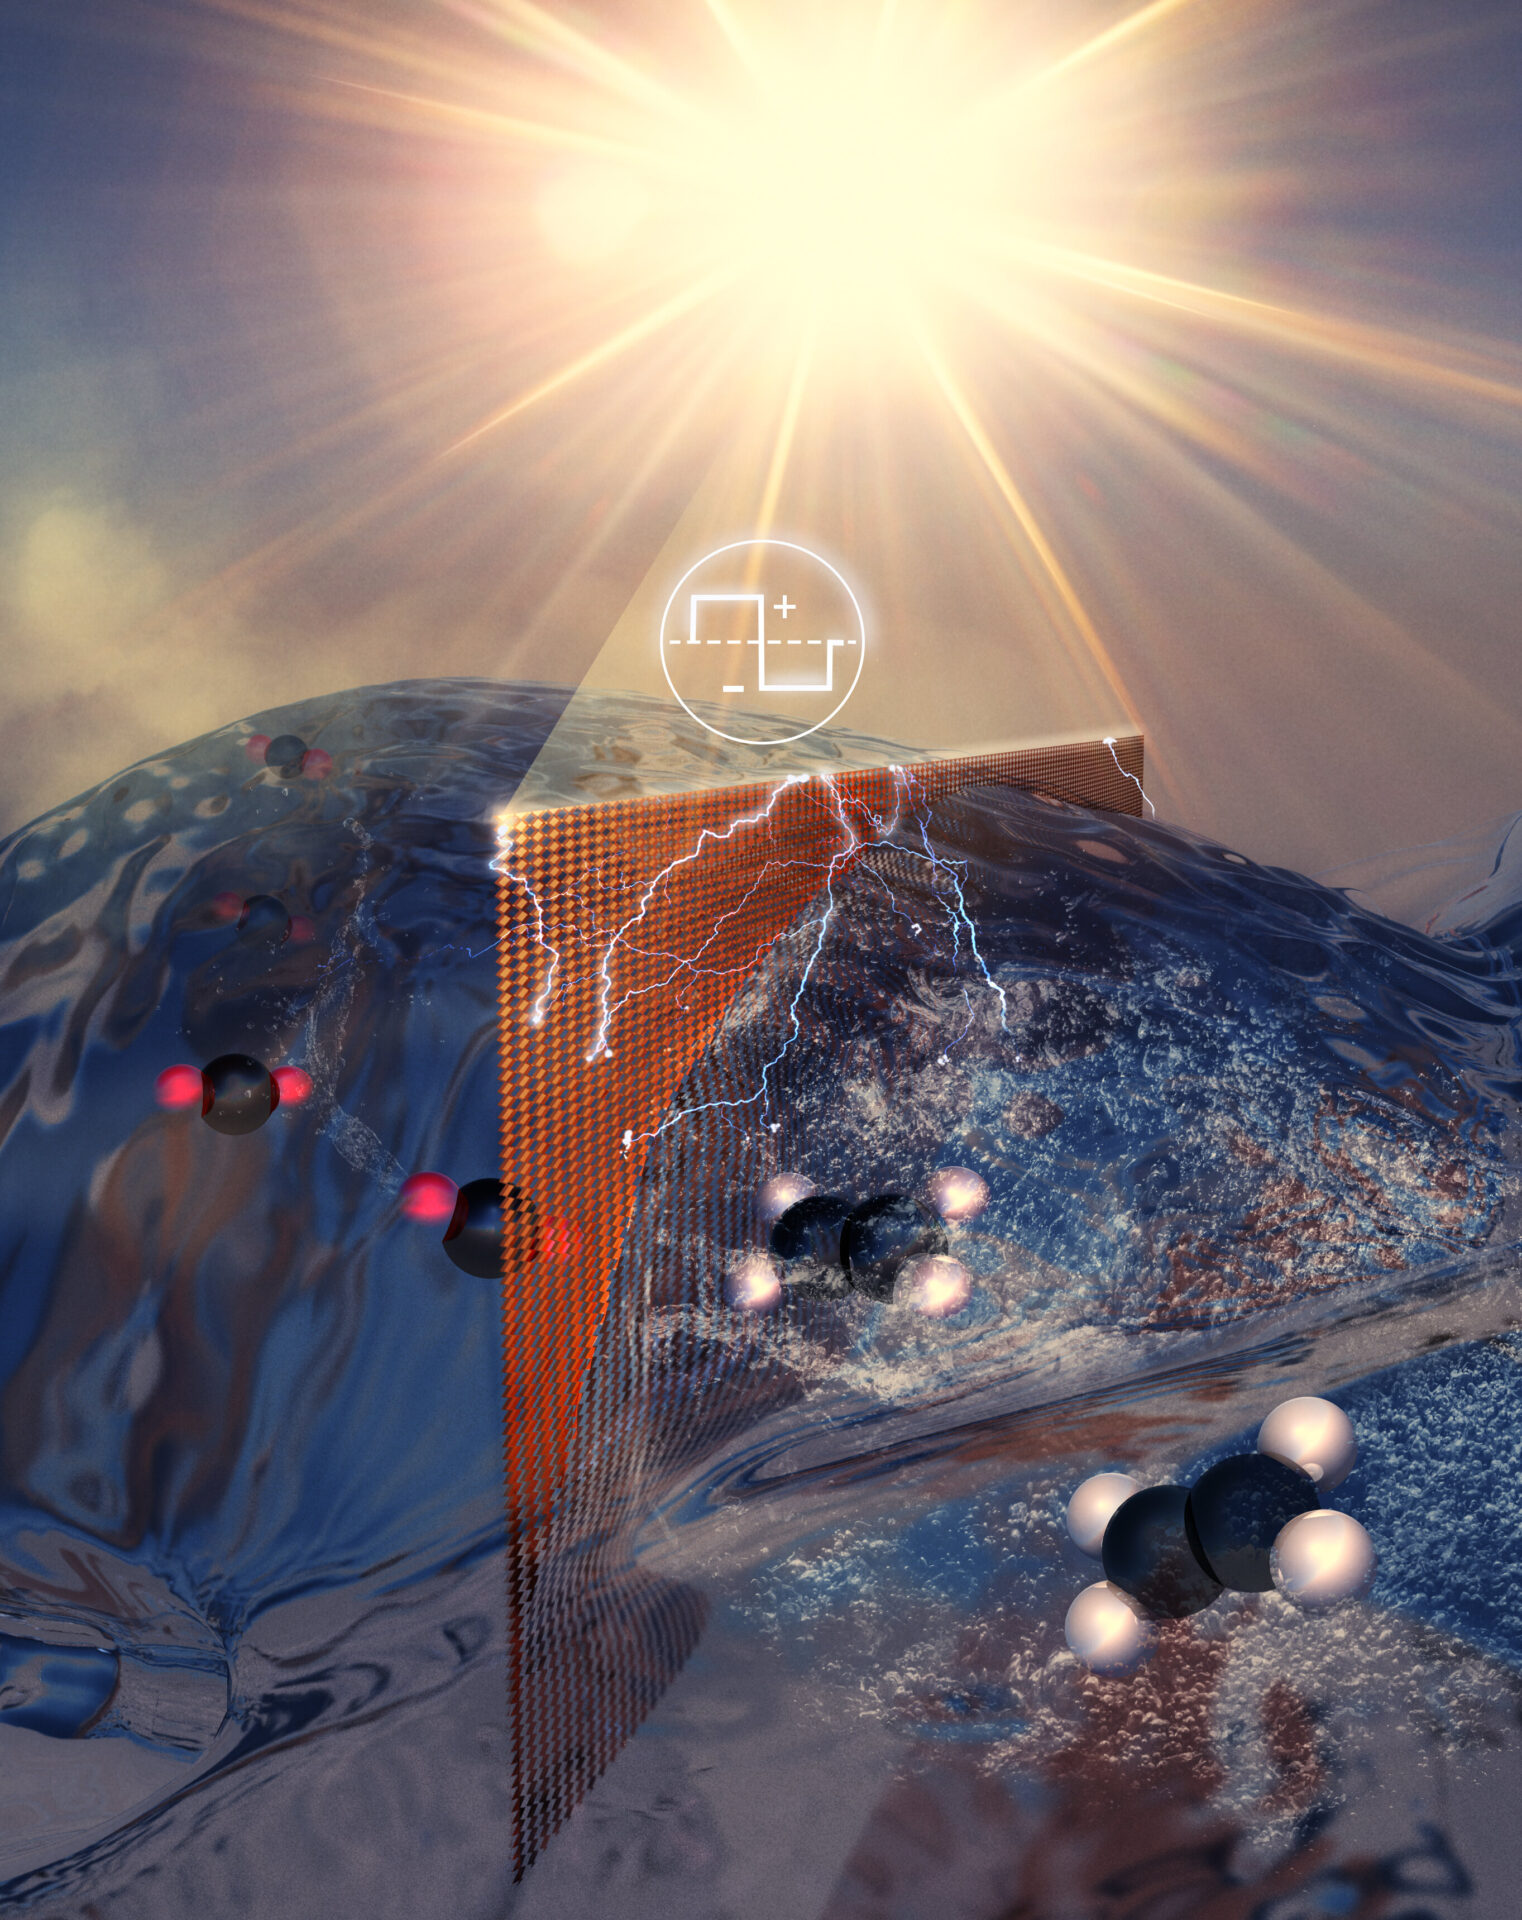 Abstract illustration of atoms passing through water and an electrified membrane under a shining sun. Illustration: Meenesh Singh.